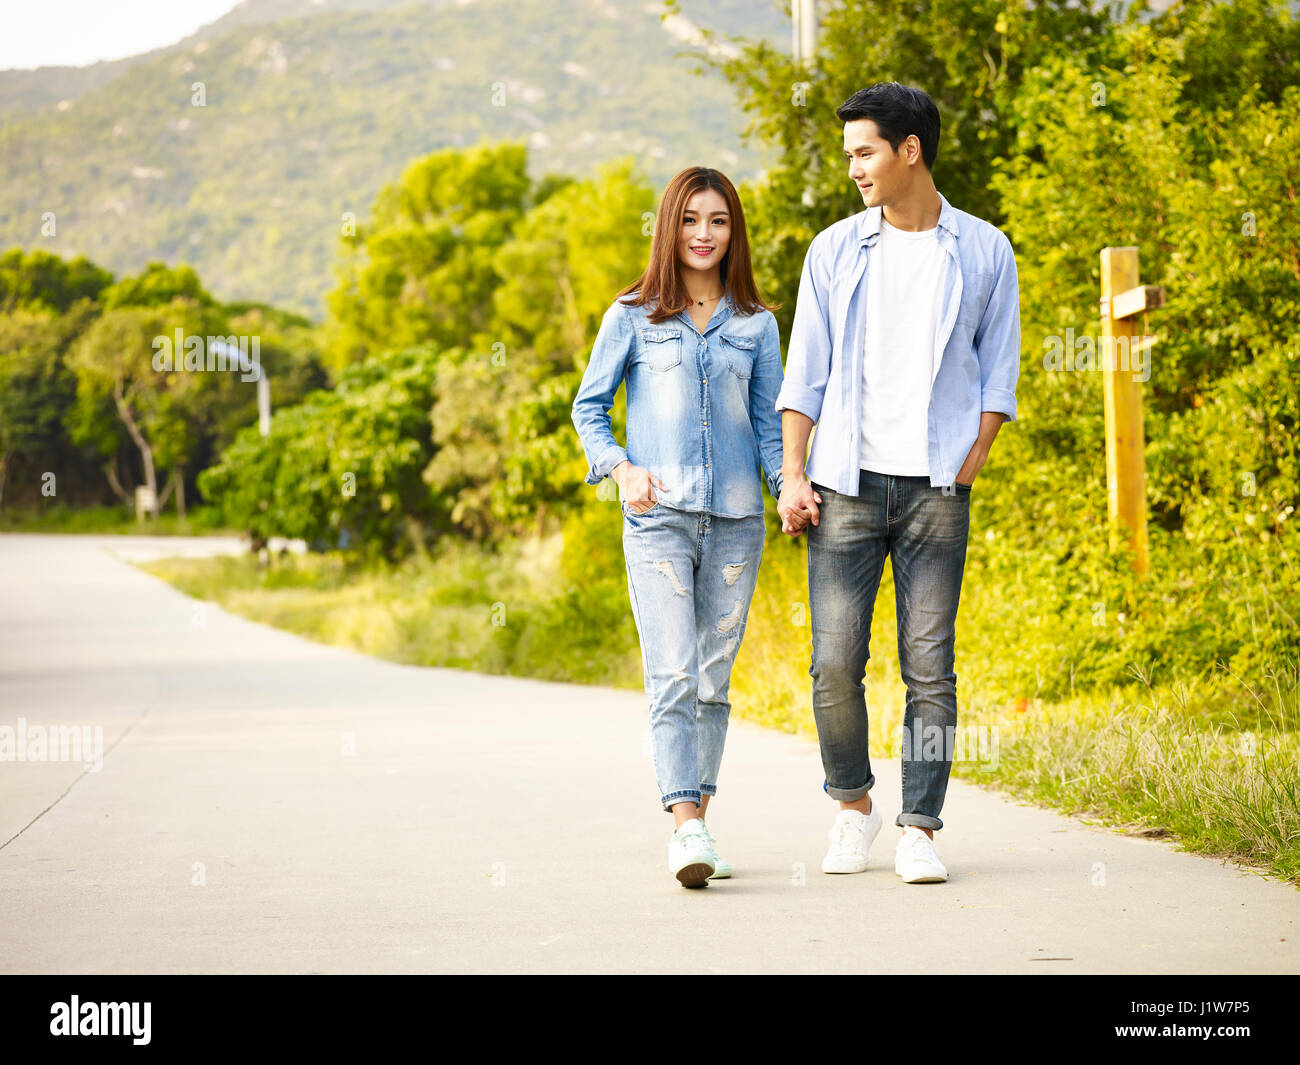 young asian couple walking on rural road. Stock Photo